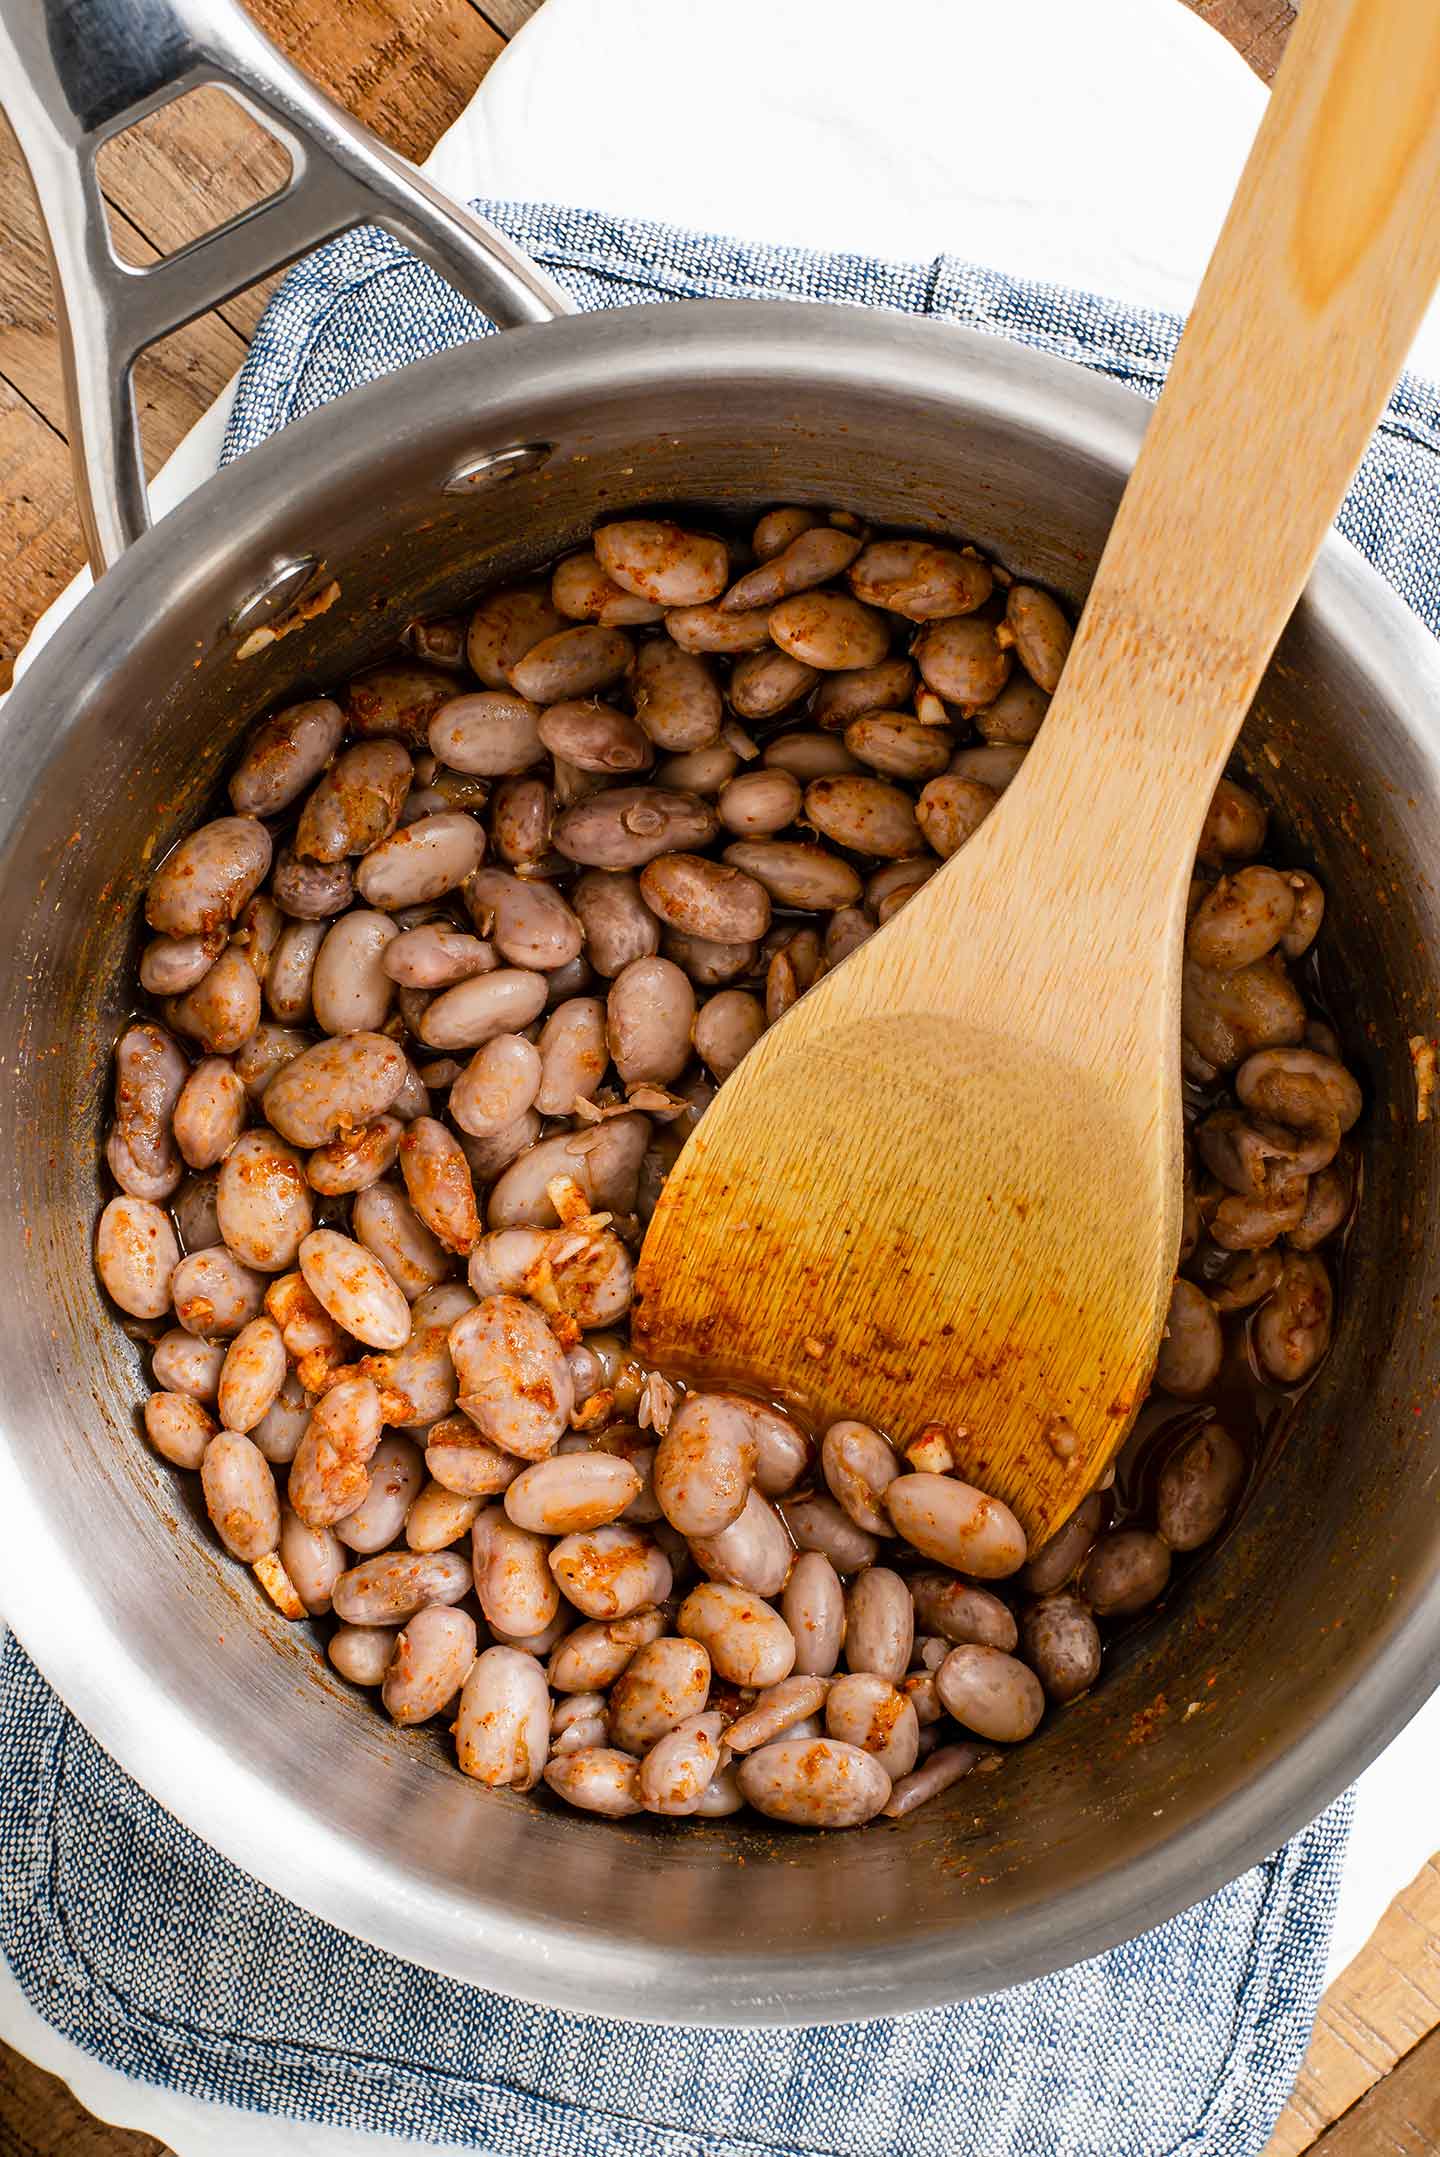 Top down view of seasoned pinto beans cooking in a pot with some broth.